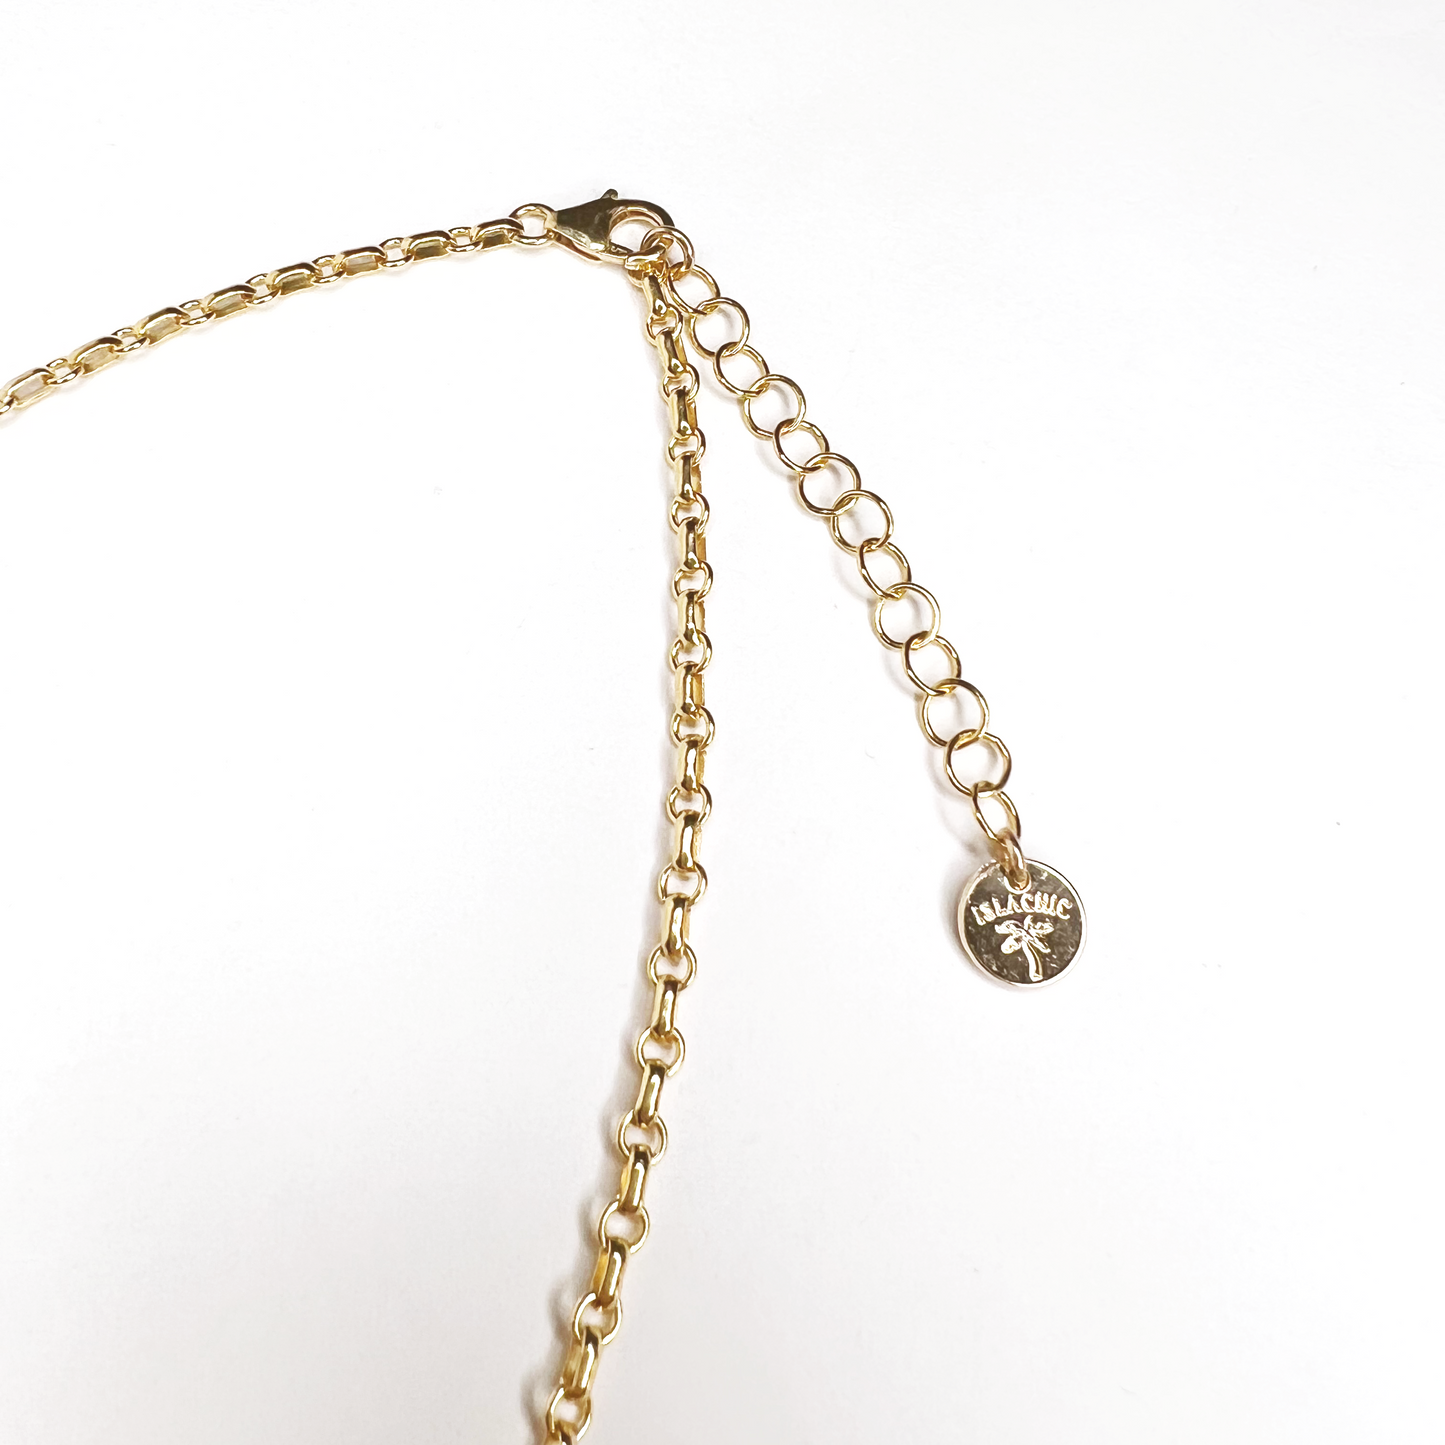 A close-up image of an extender chain with IslaChic branding tag on a 3 charm gold-filled necklace on a white surface. Necklace can be adjustable from 16 inches to 18 inches. Necklace has a star, body, and a cubic zirconia heart charm.